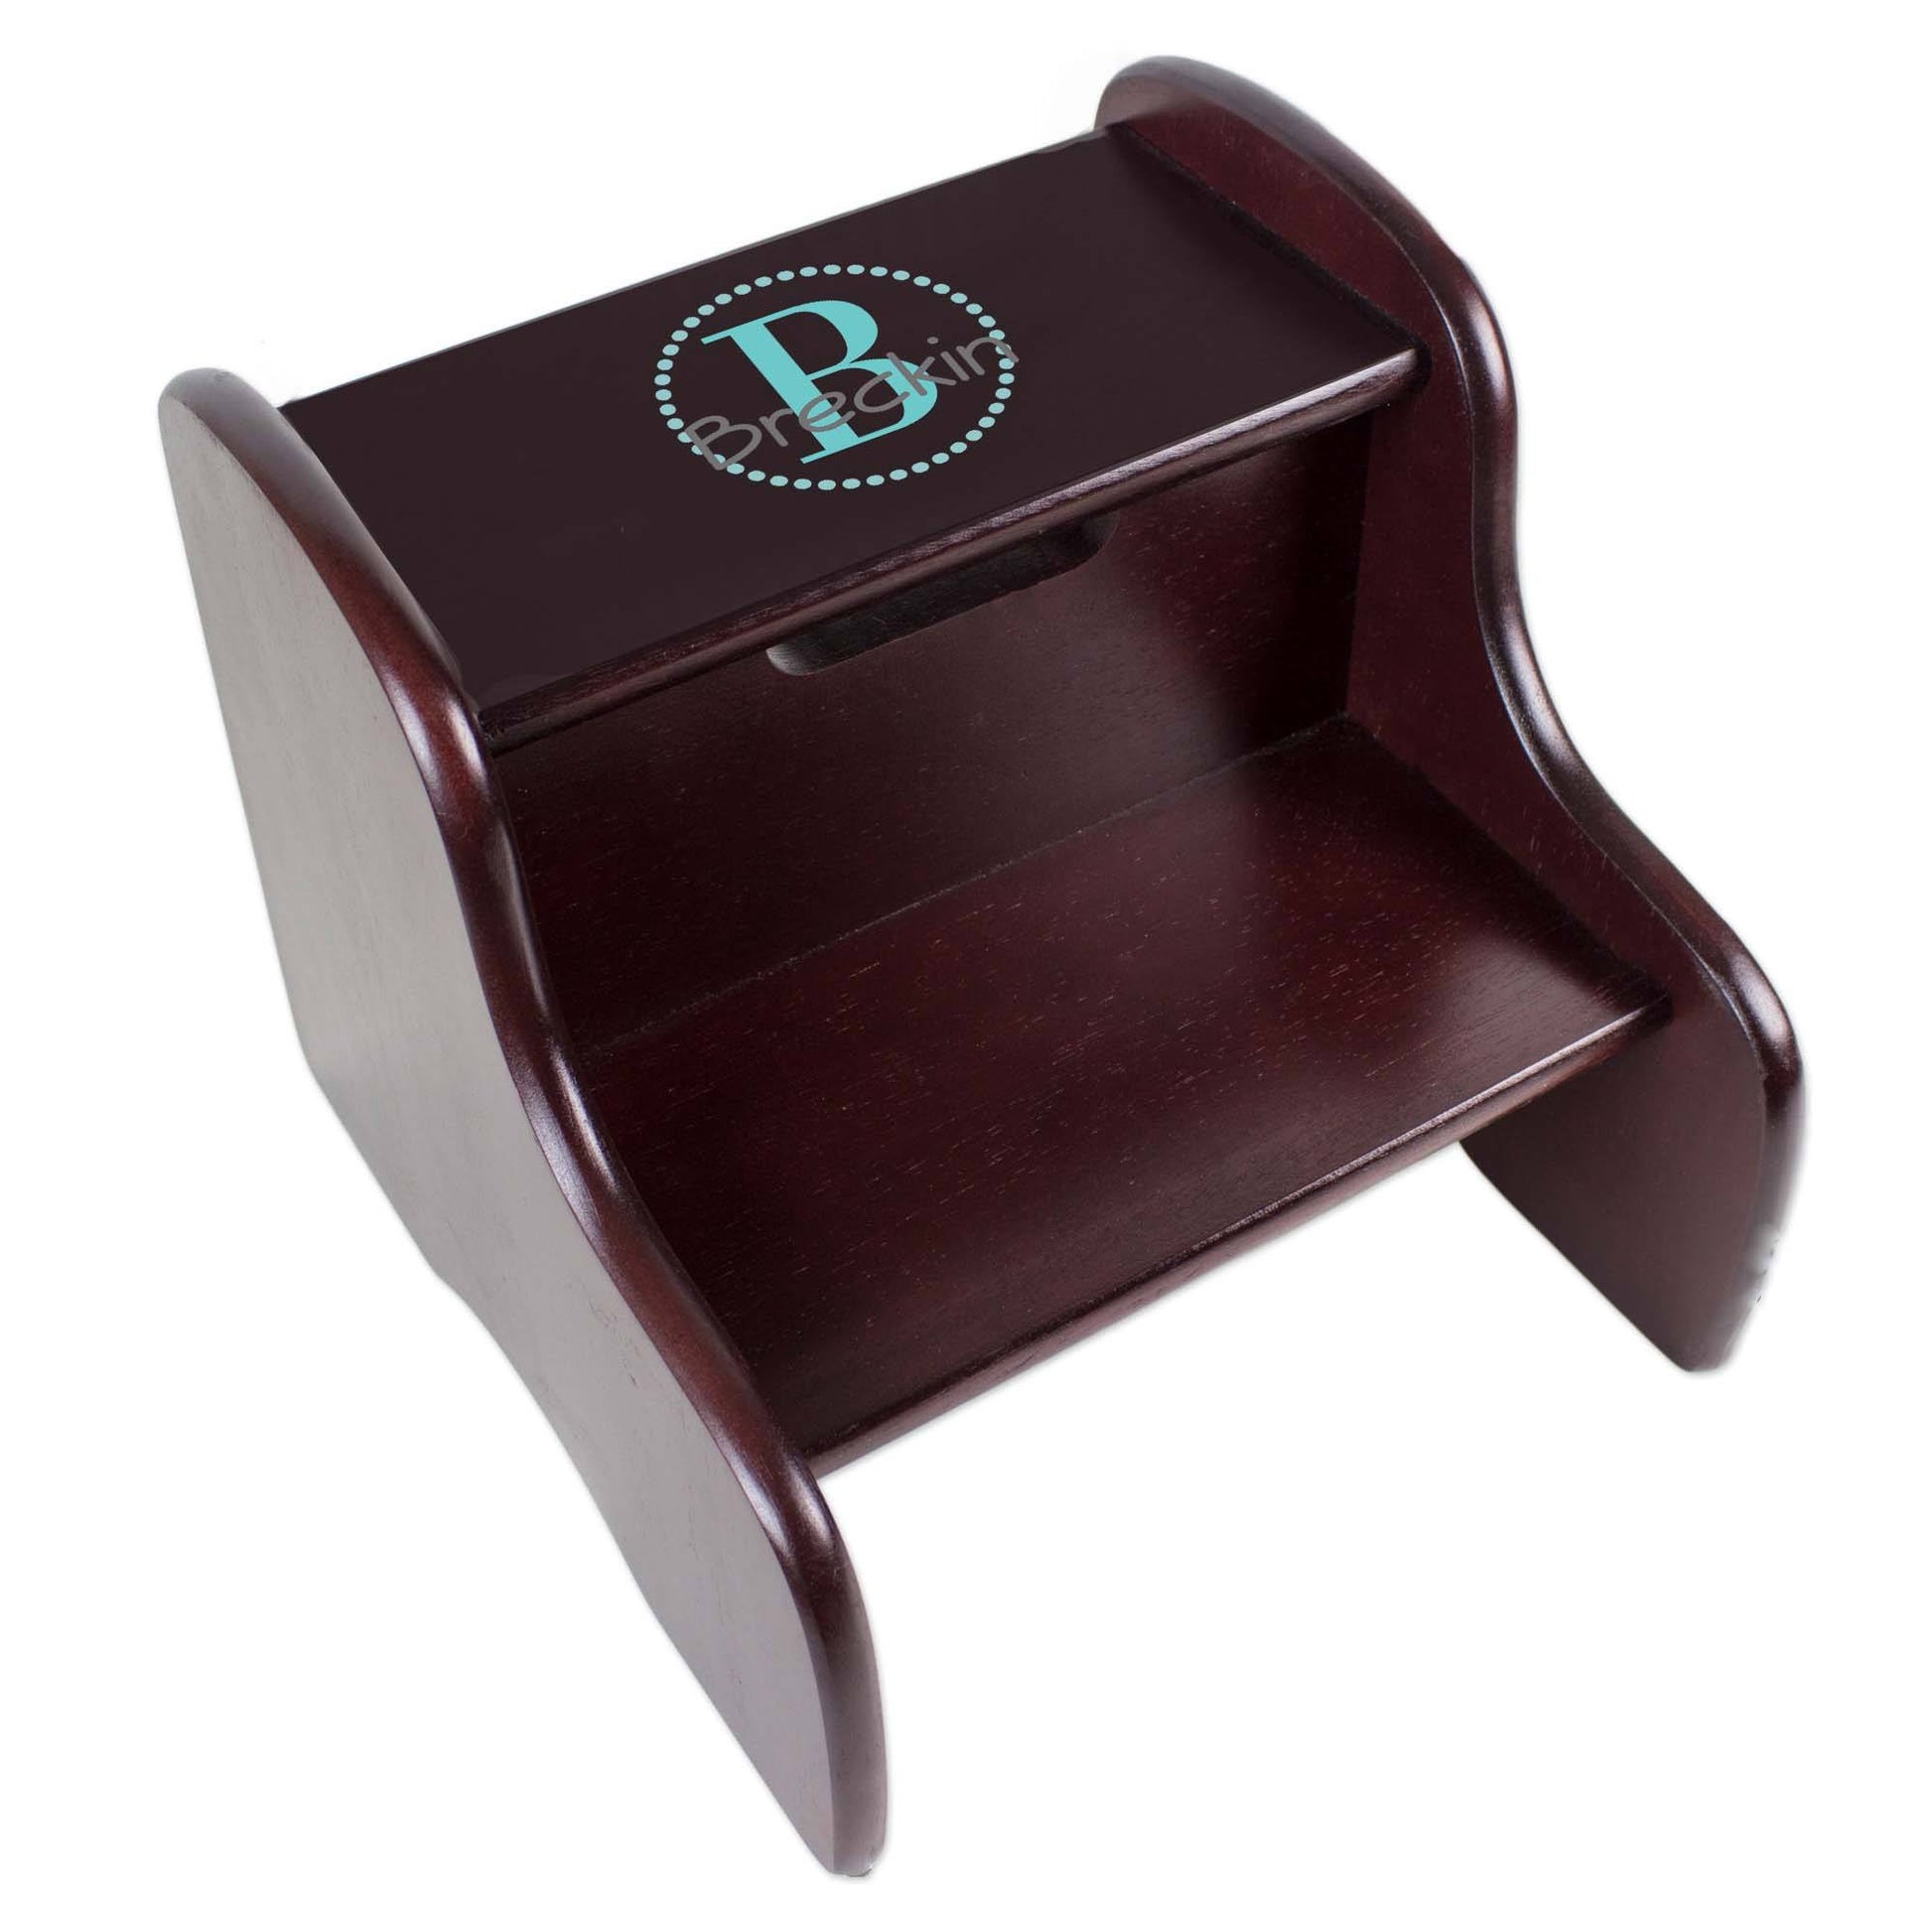 Personalized Espresso Fixed Stool With Teal Circle Design